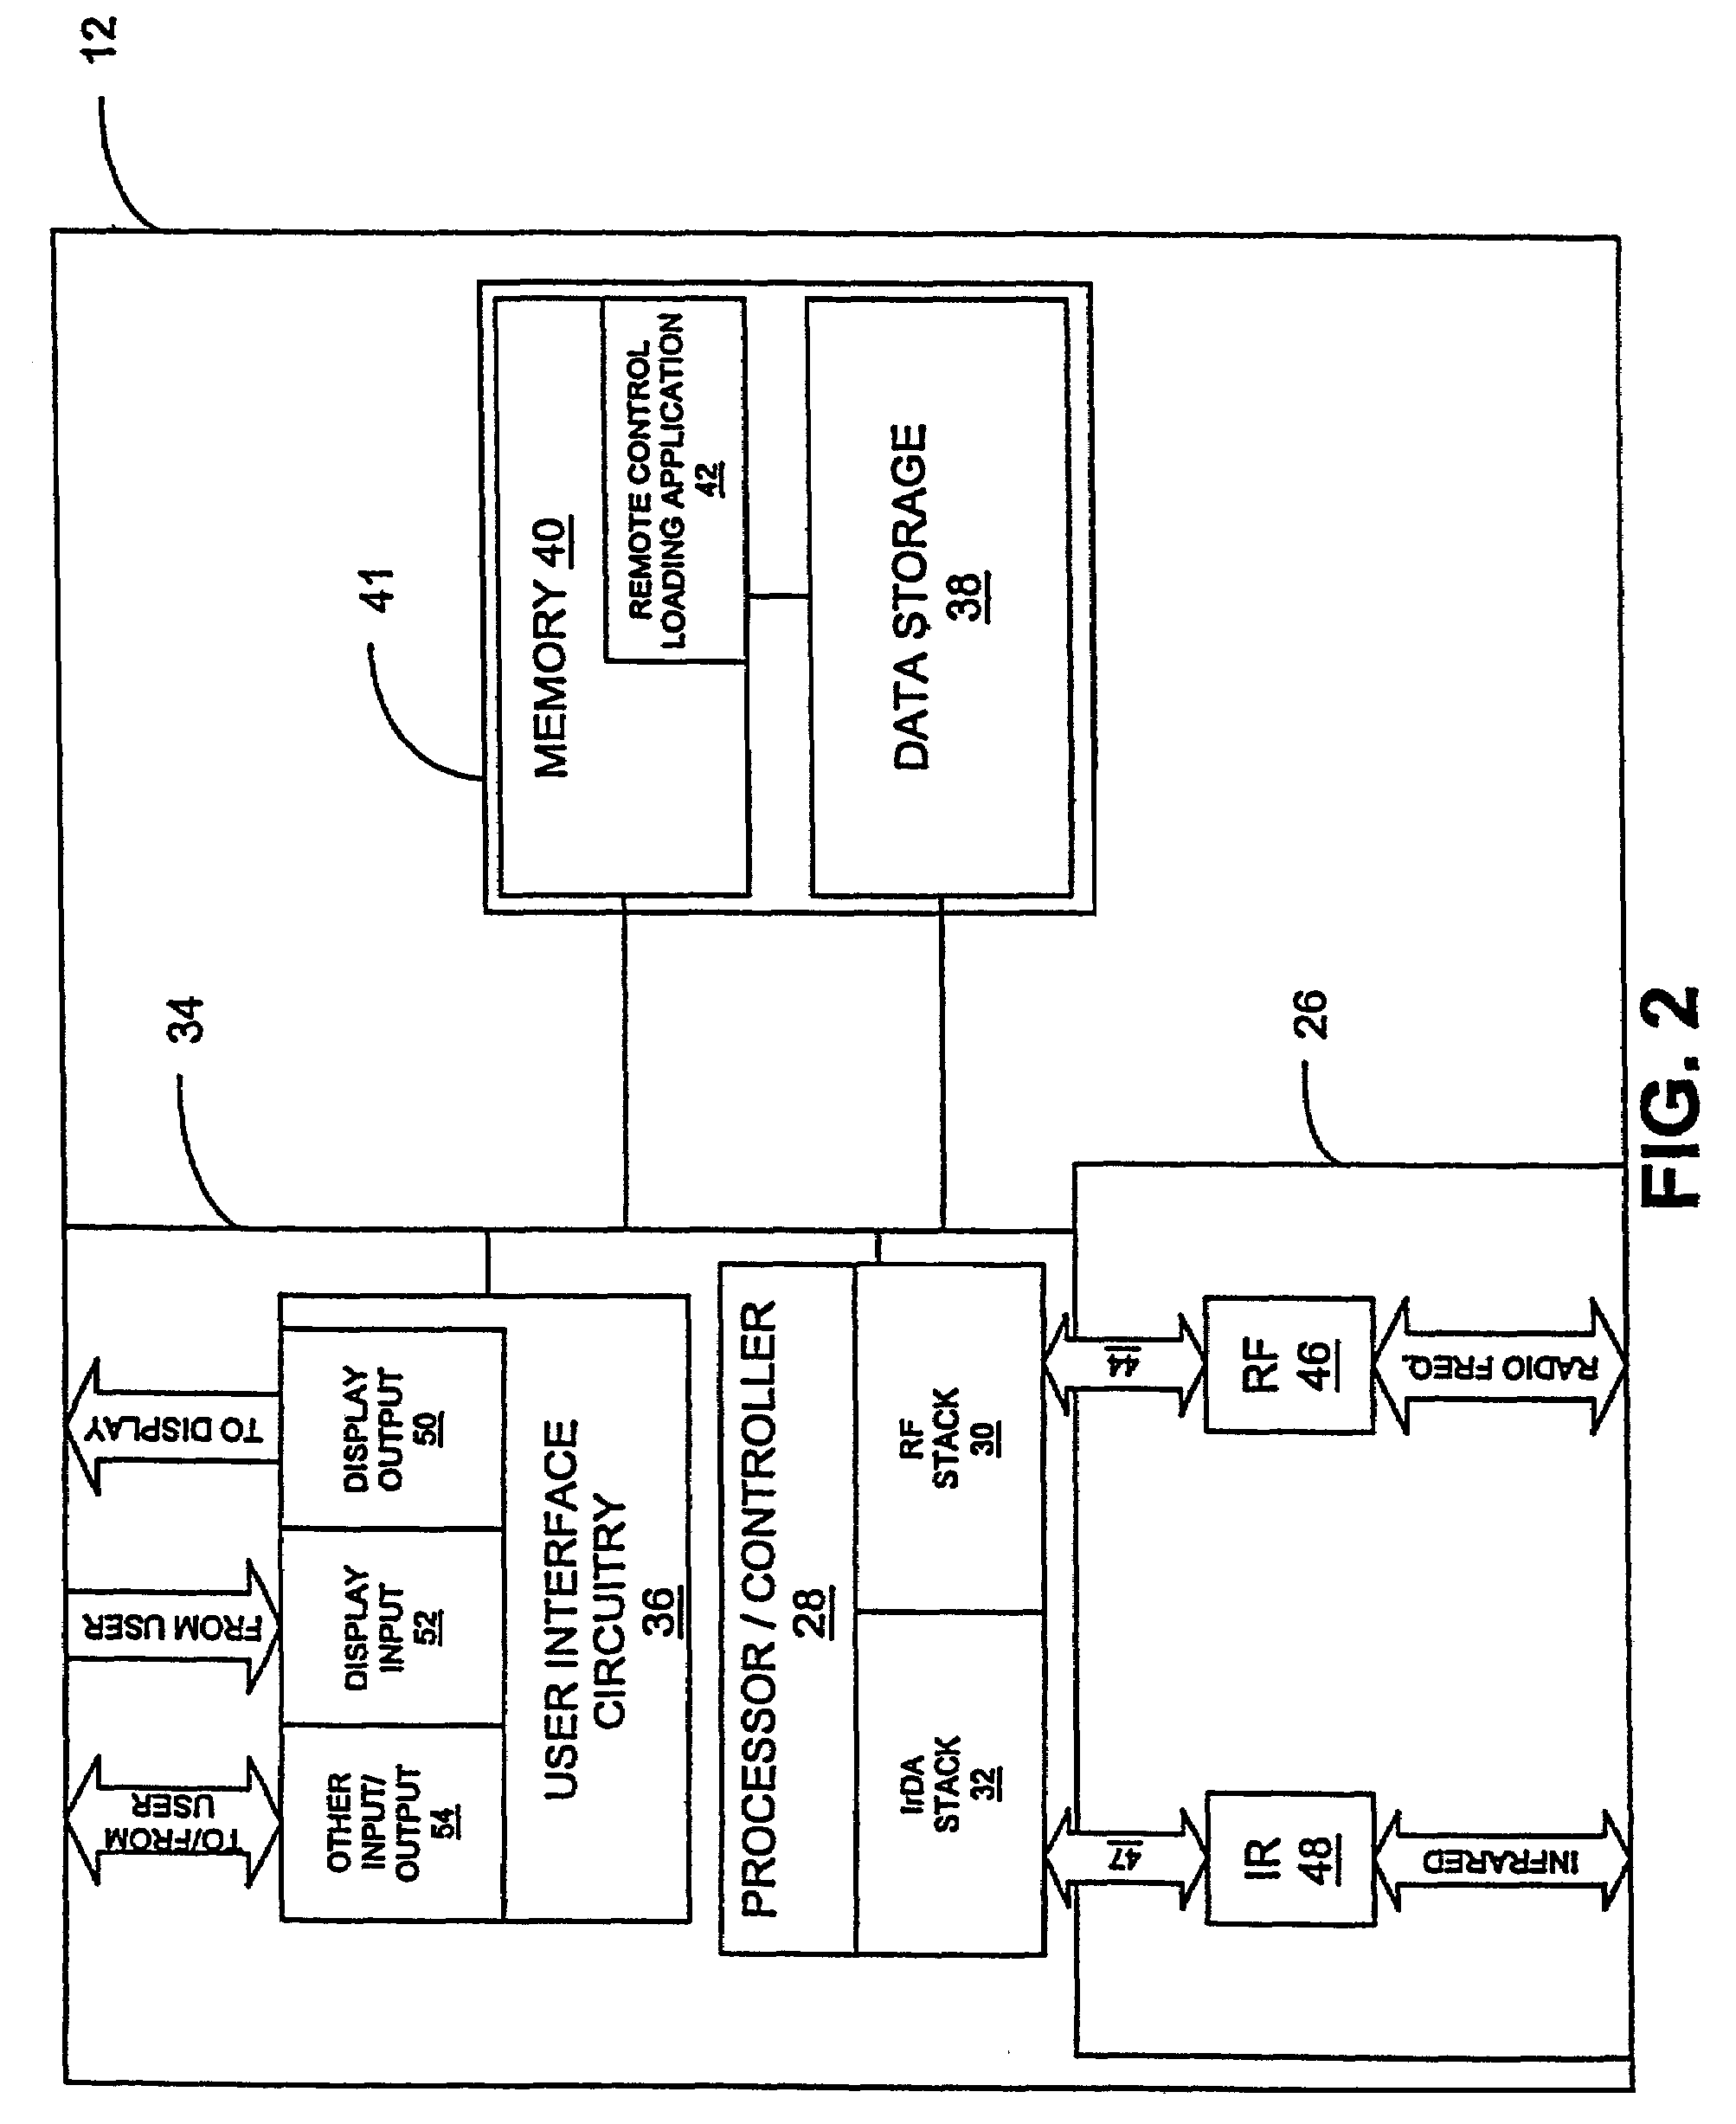 Method and system for implementing wireless data transfers between a selected group of mobile computing devices